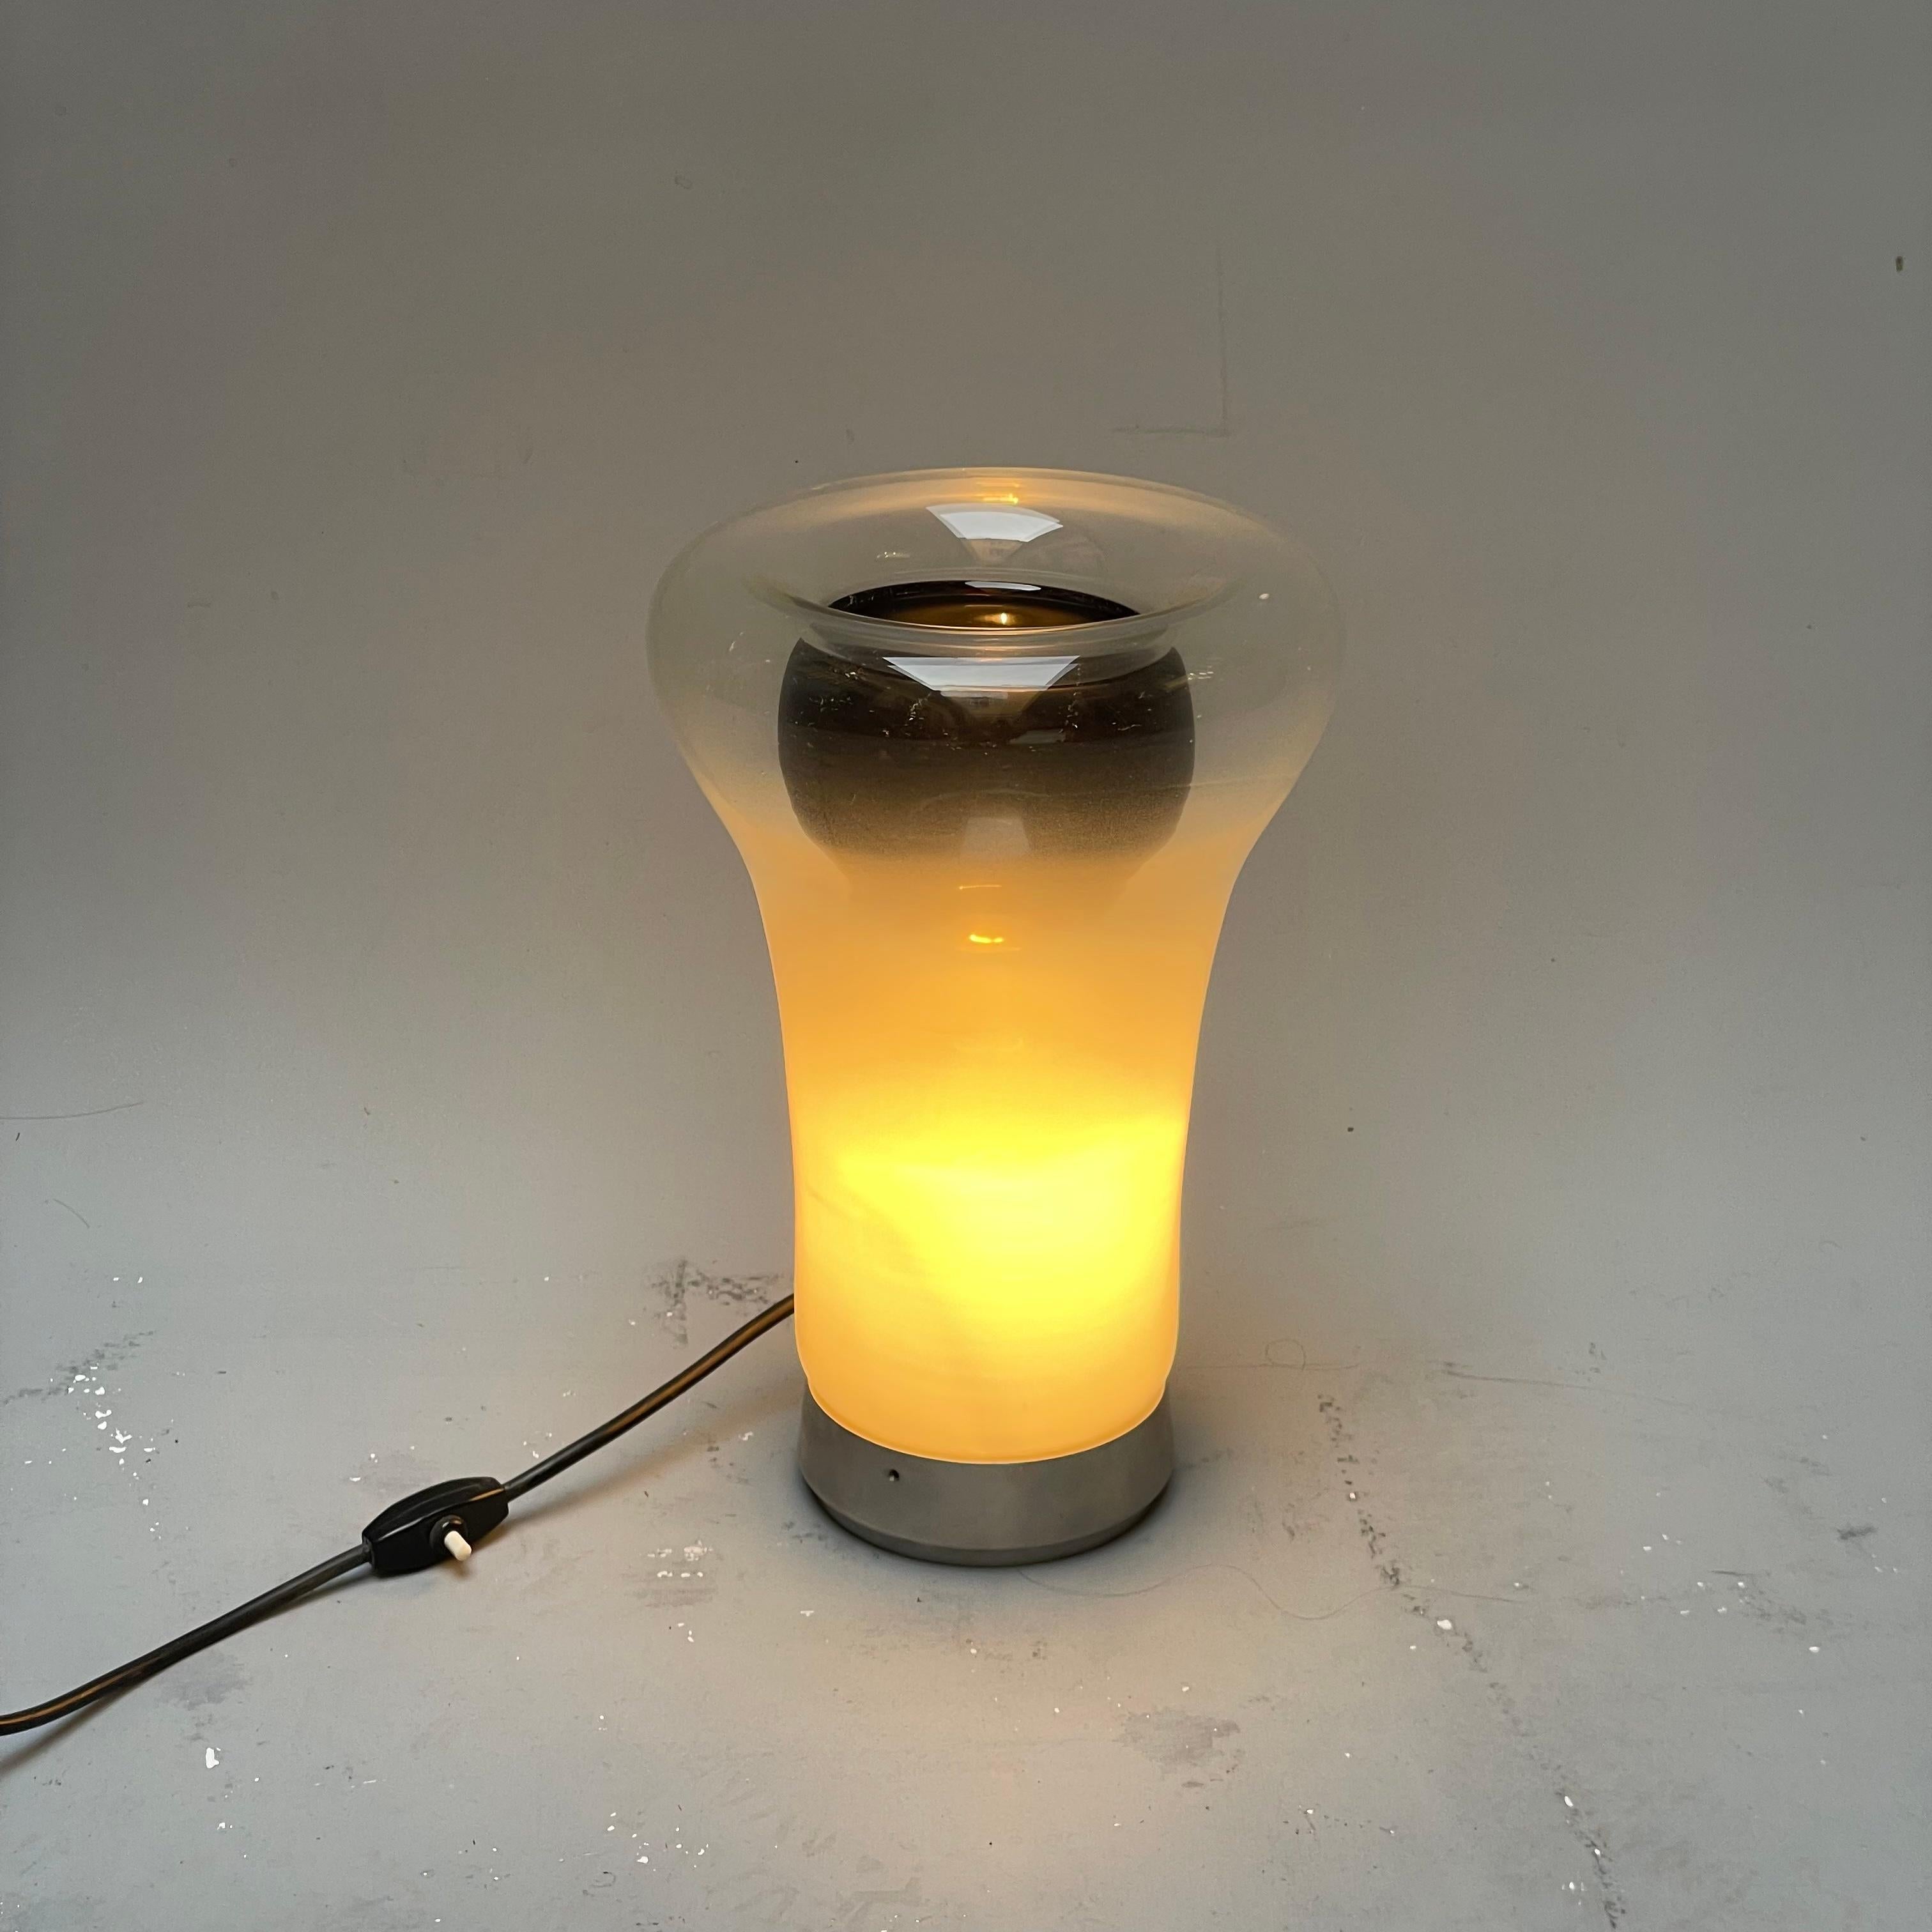 Designed by Angelo Mangiarotti and produced by Artemide in 1967, the lamp is made with a metal ring that supports a blown glass diffuser. Thanks to its shaded surface it can dim the light of the light source. The lamp is in very good condition to be